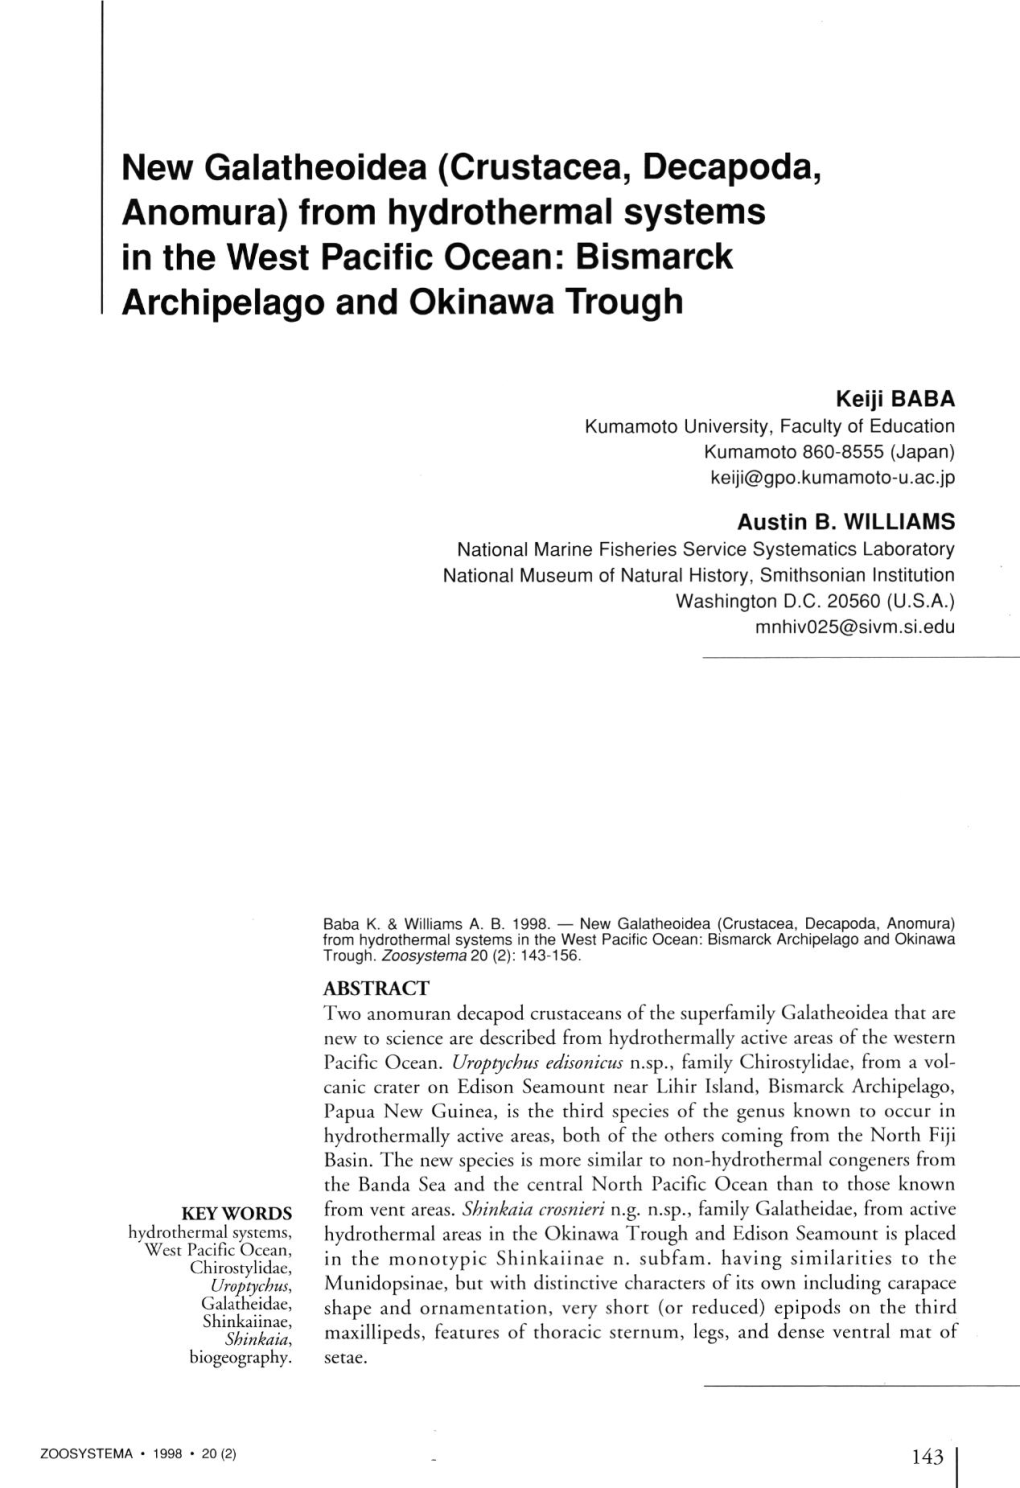 Crustacea, Decapoda, Anomura) from Hydrothermal Systems in the West Pacific Océan: Bismarck Archipelago and Okinawa Trough